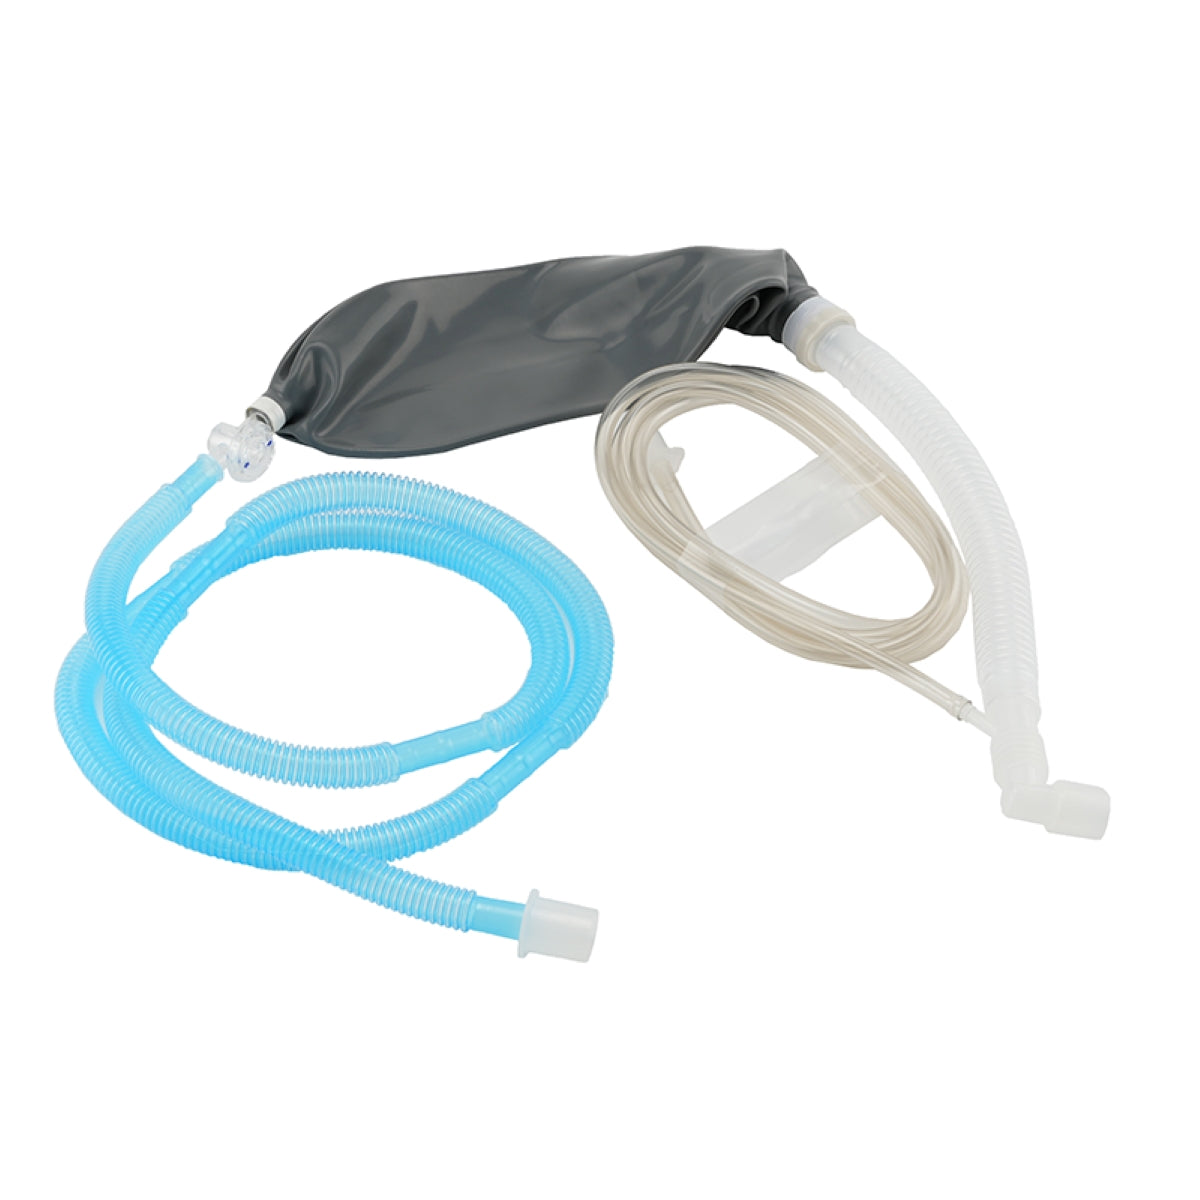 Jackson Ree's Type, Anesthesia Breathing Circuit with anesthesia bag and adjustable valve